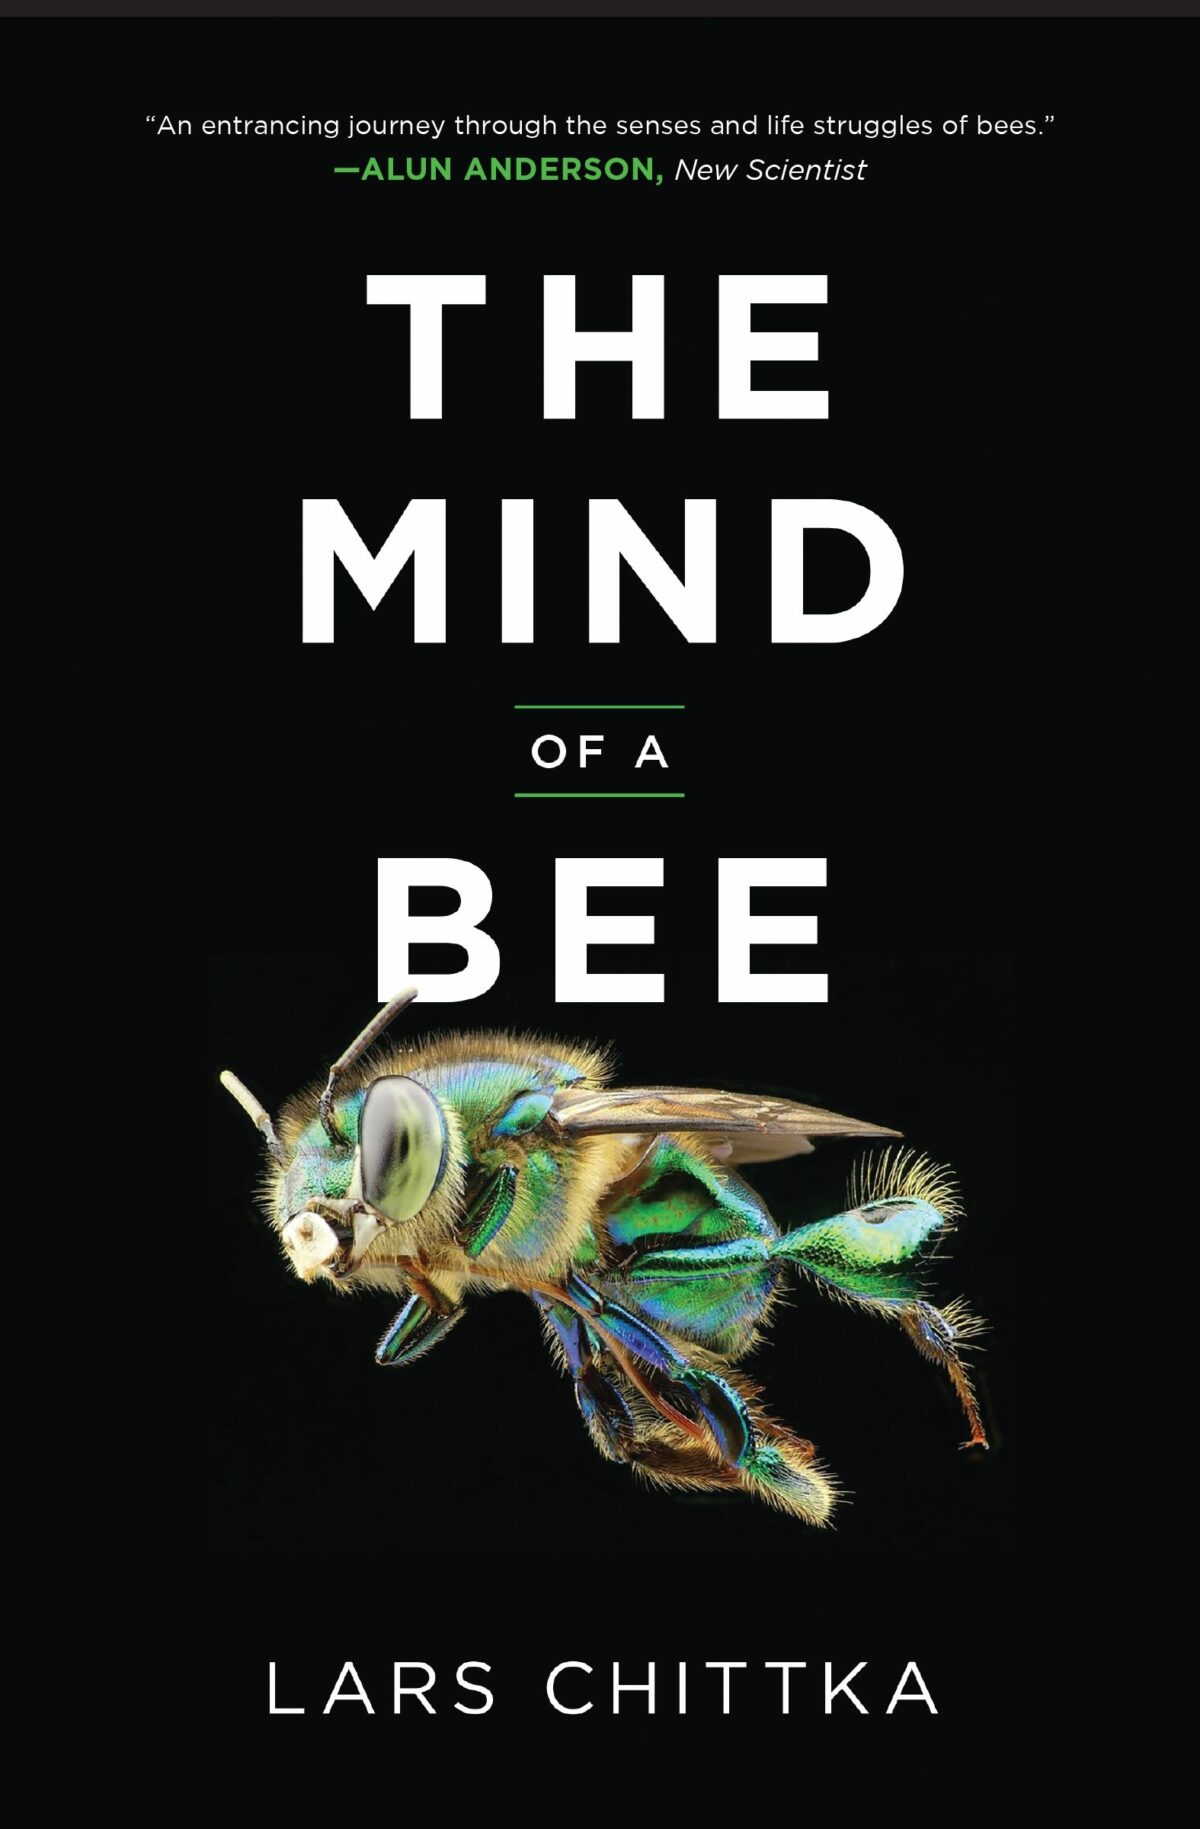 Book review: The Mind of a Bee